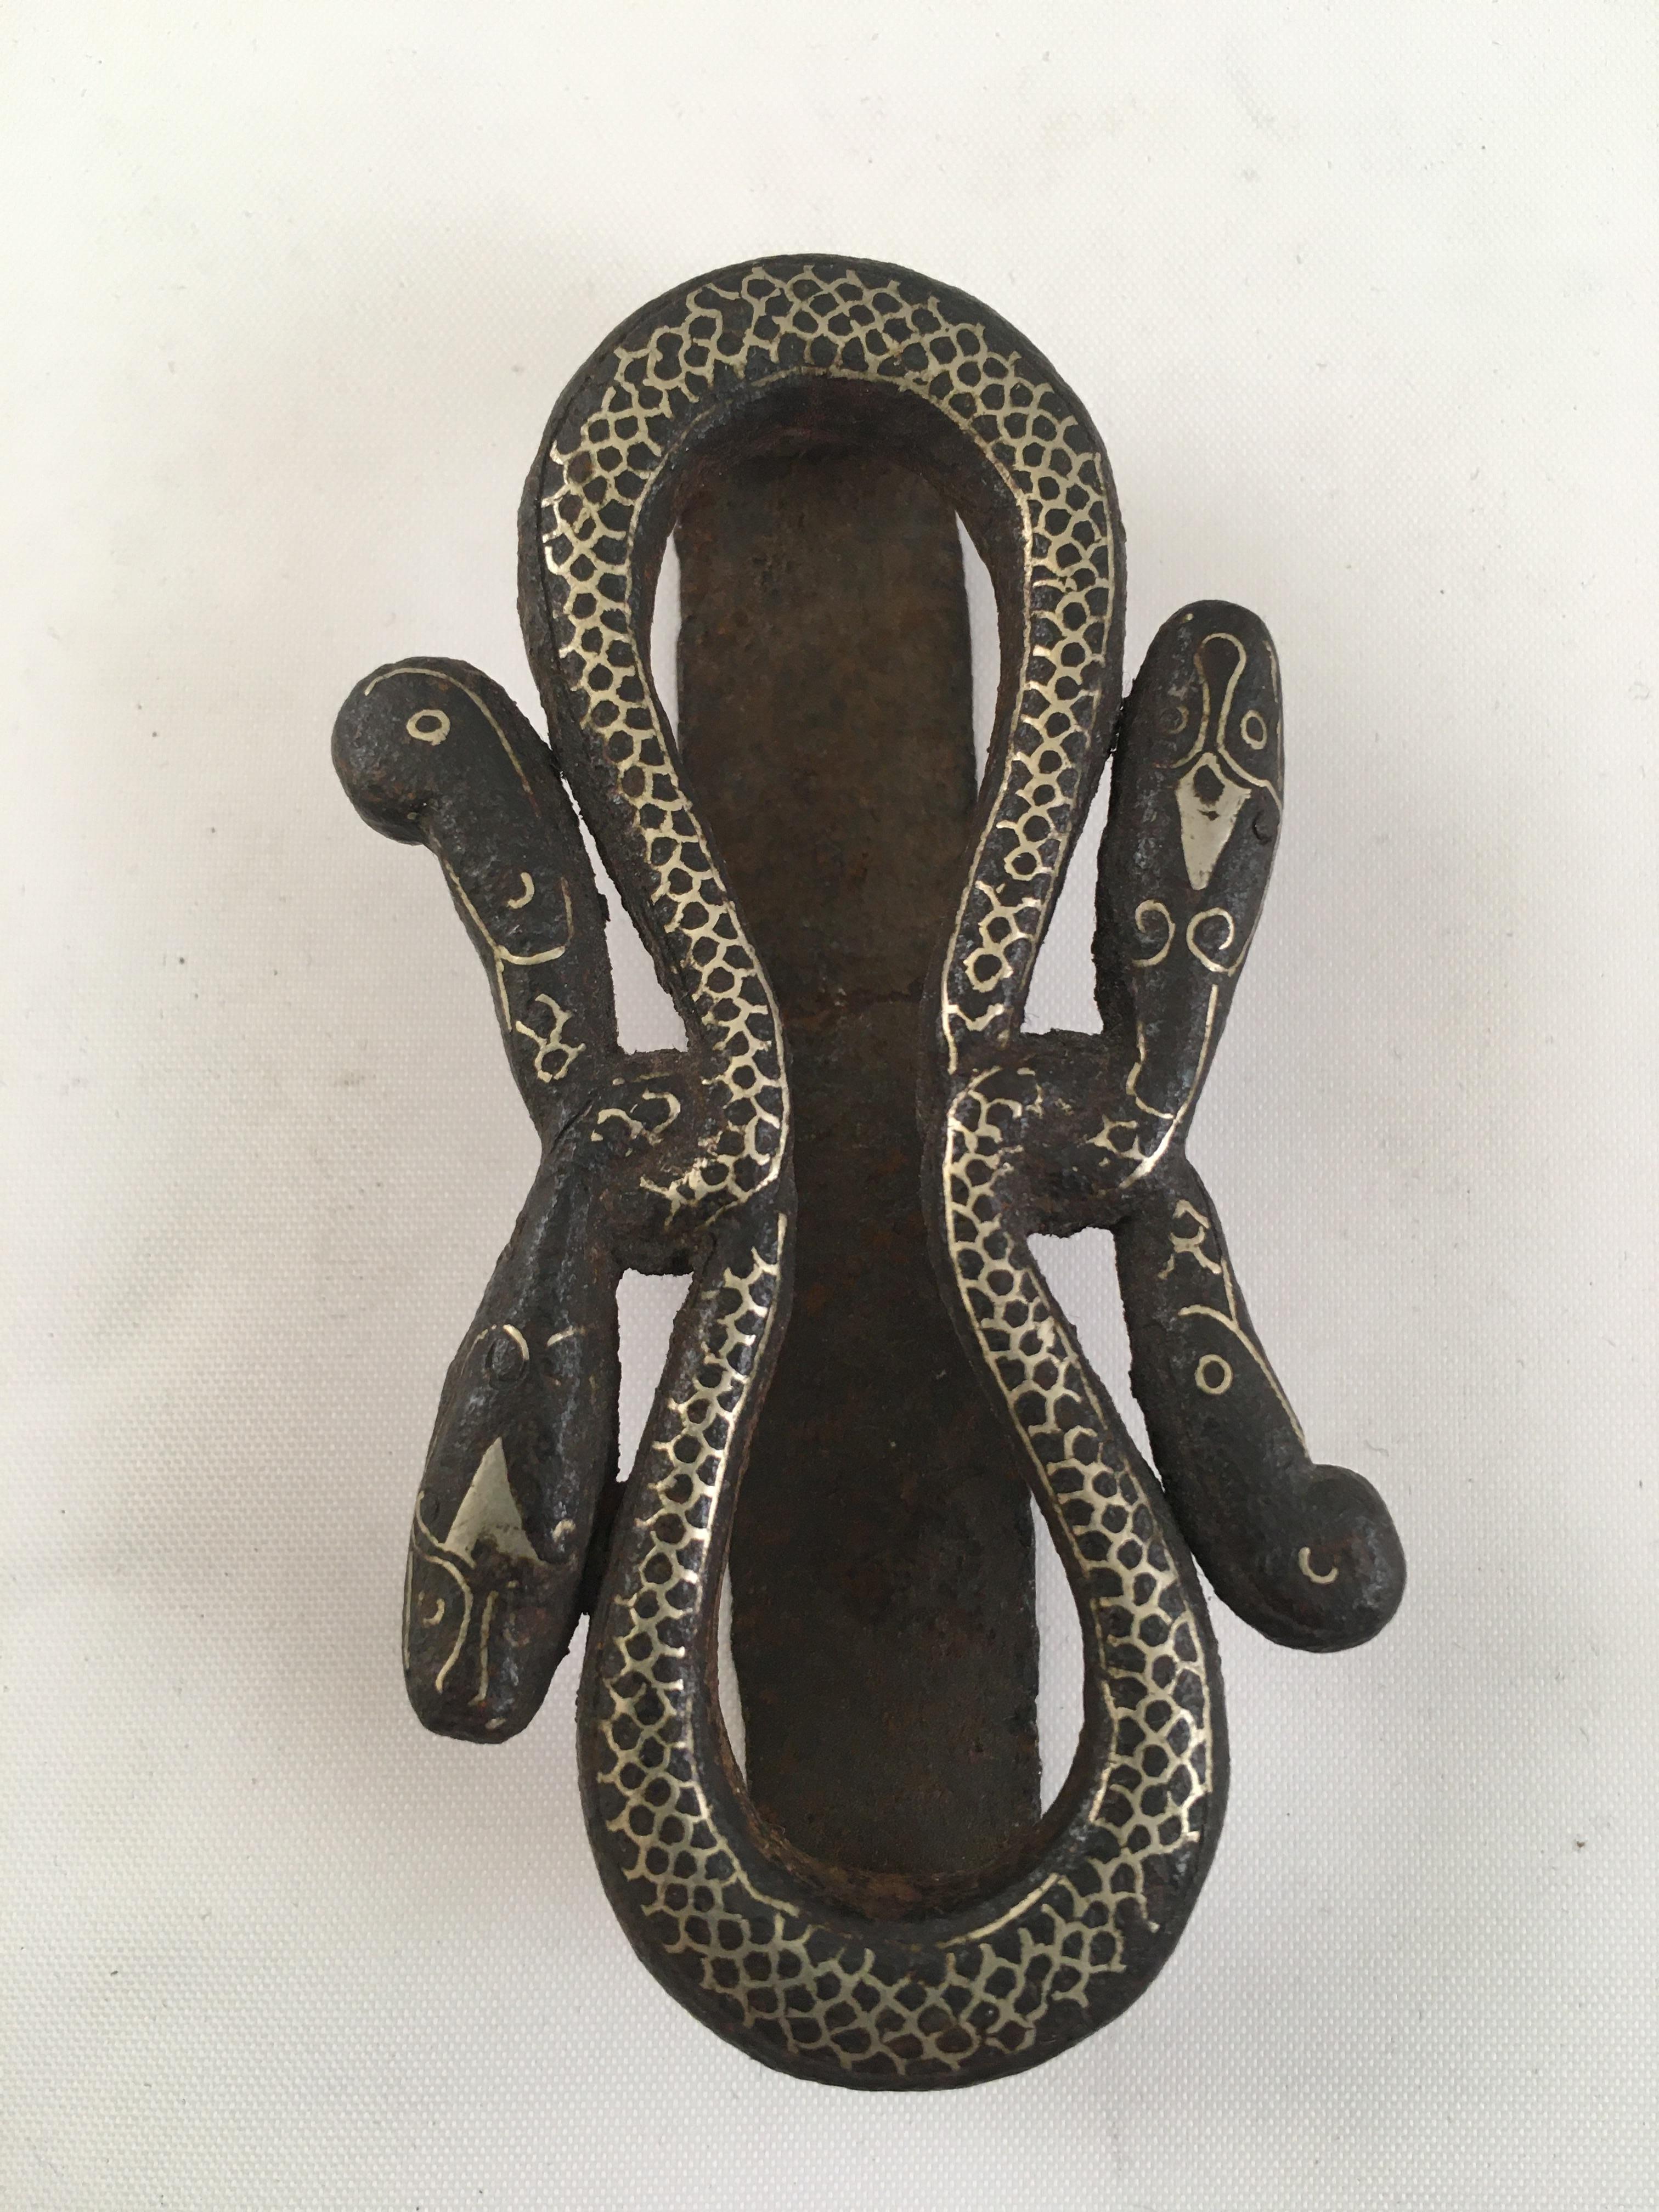 An antique java Surakarta court iron and silver inlay snake belt buckle and slide.
An 19th century two-piece belt buckle made from steel, shaped as intertwining snakes, and decorated with silver inlay.
A fabulous piece of snake jewelry with